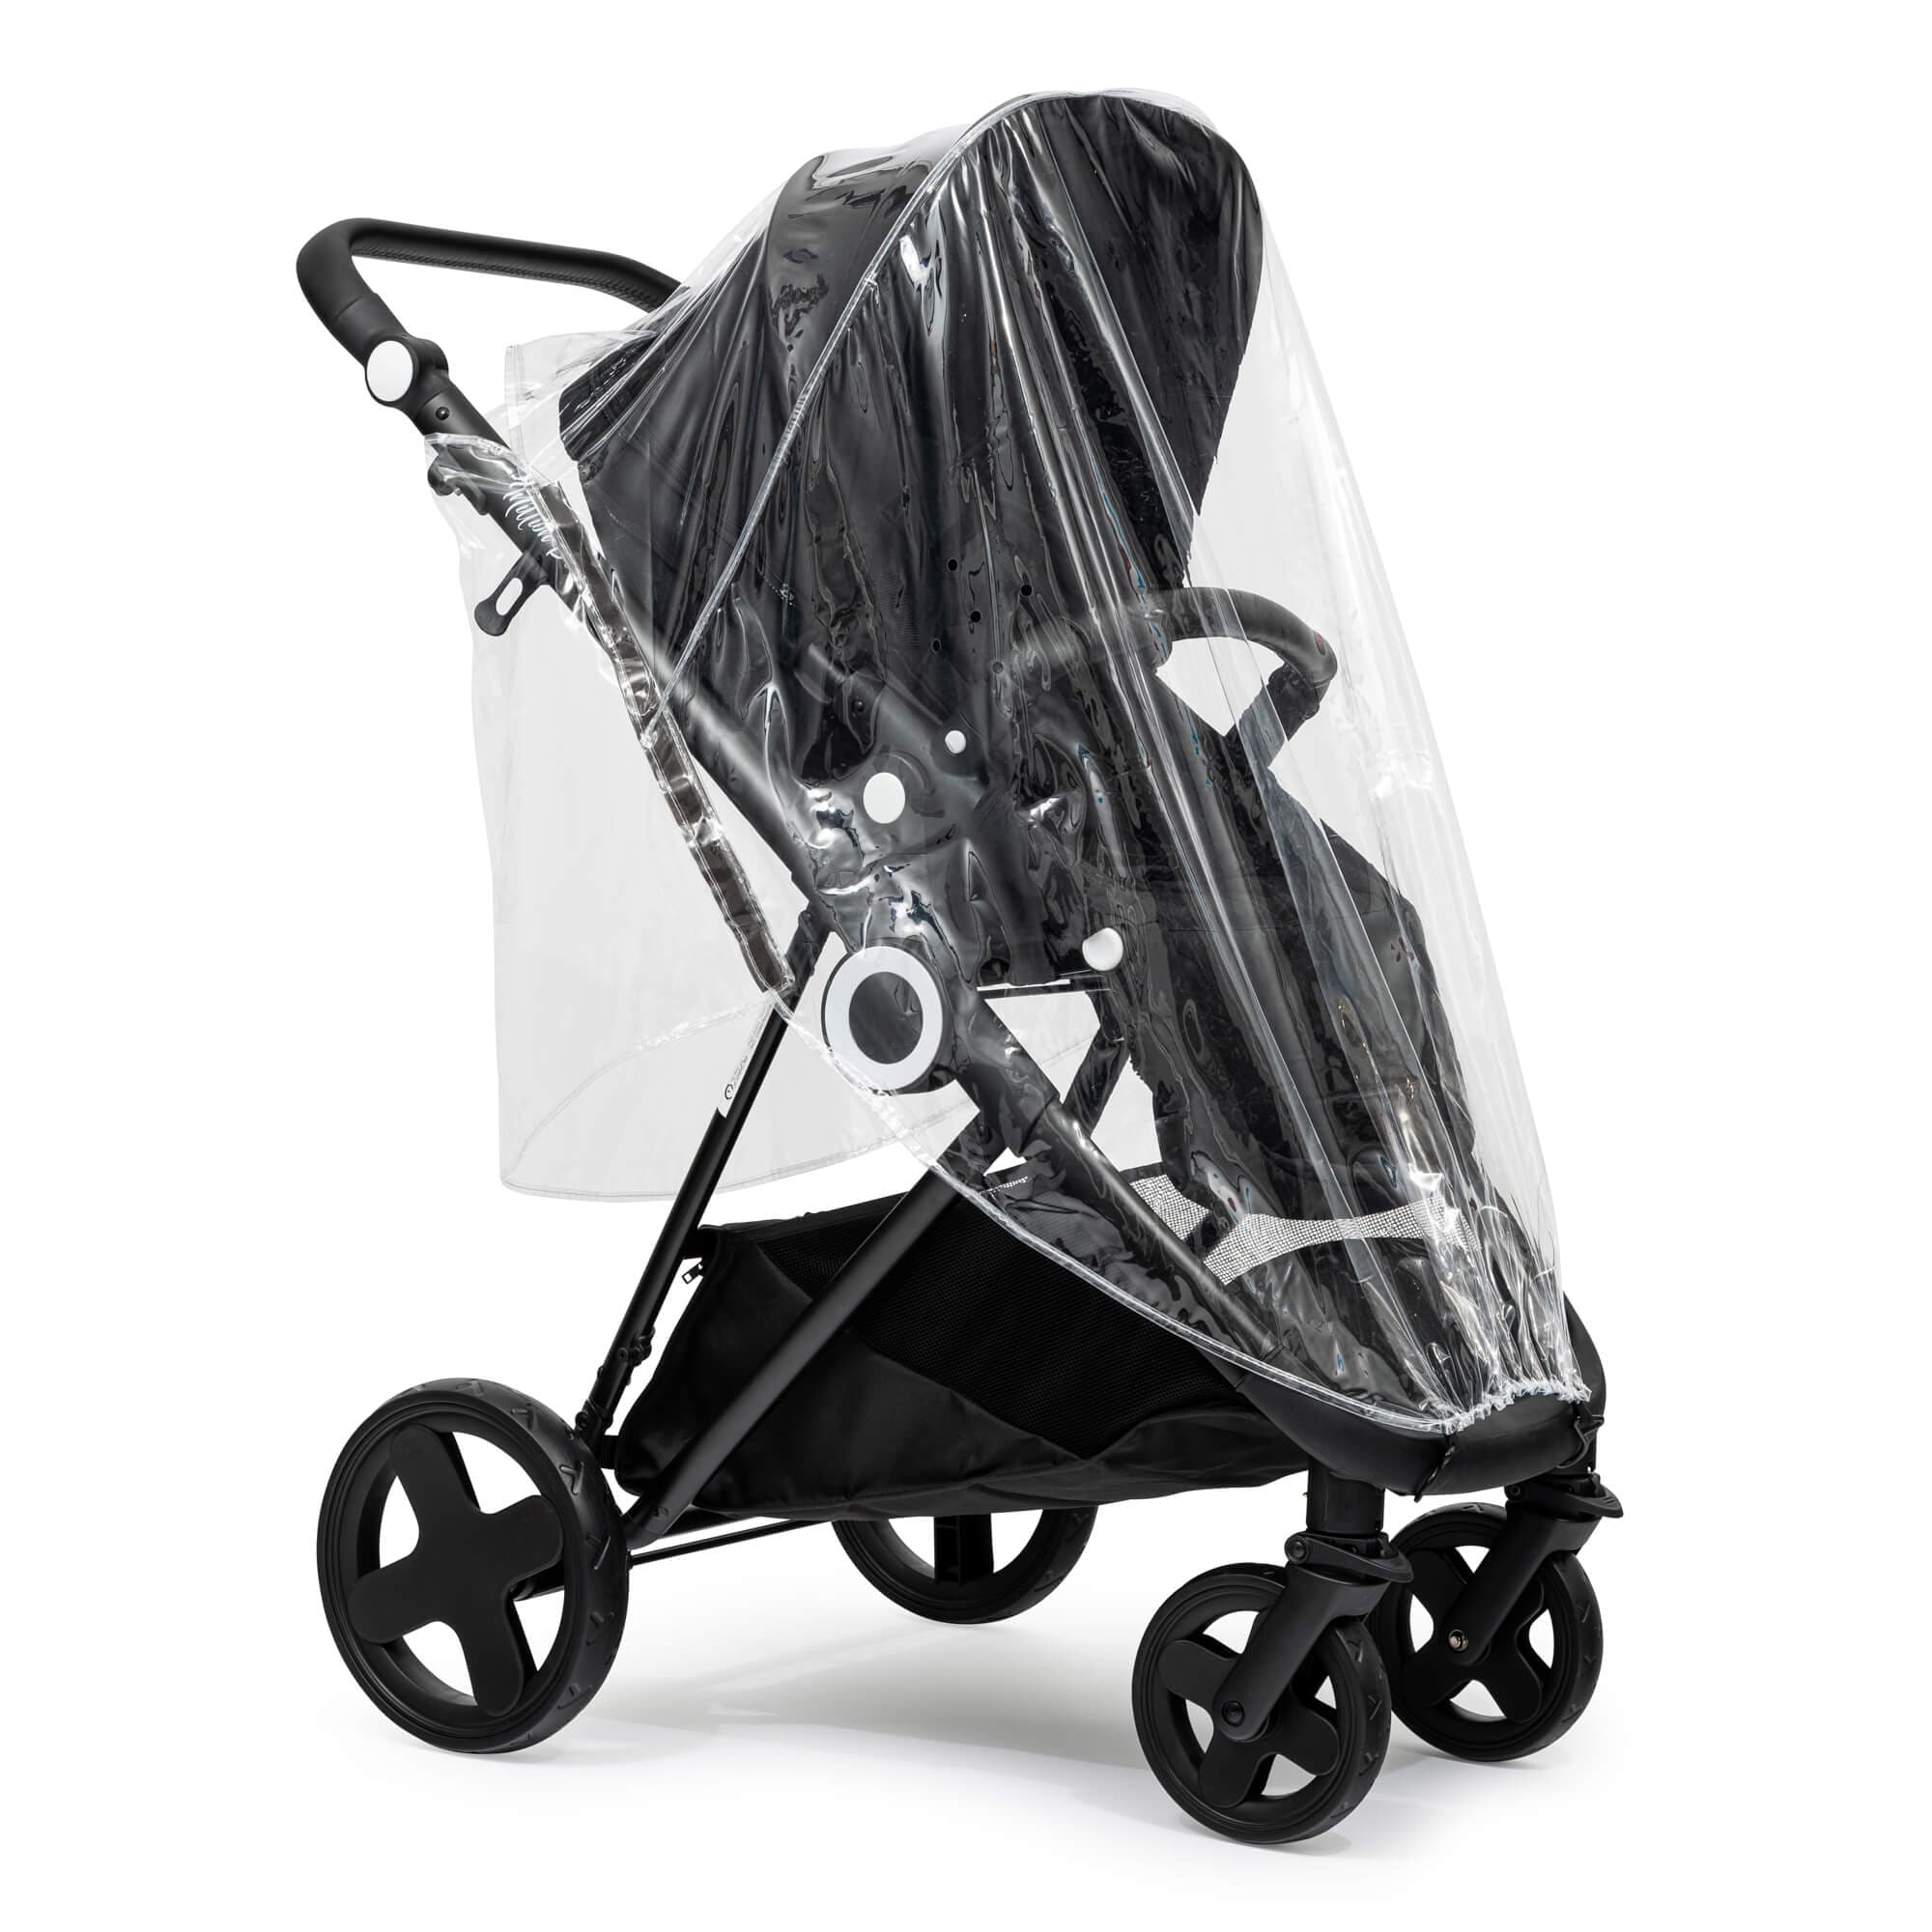 Pushchair Raincover Compatible With DoBuggy - For Your Little One